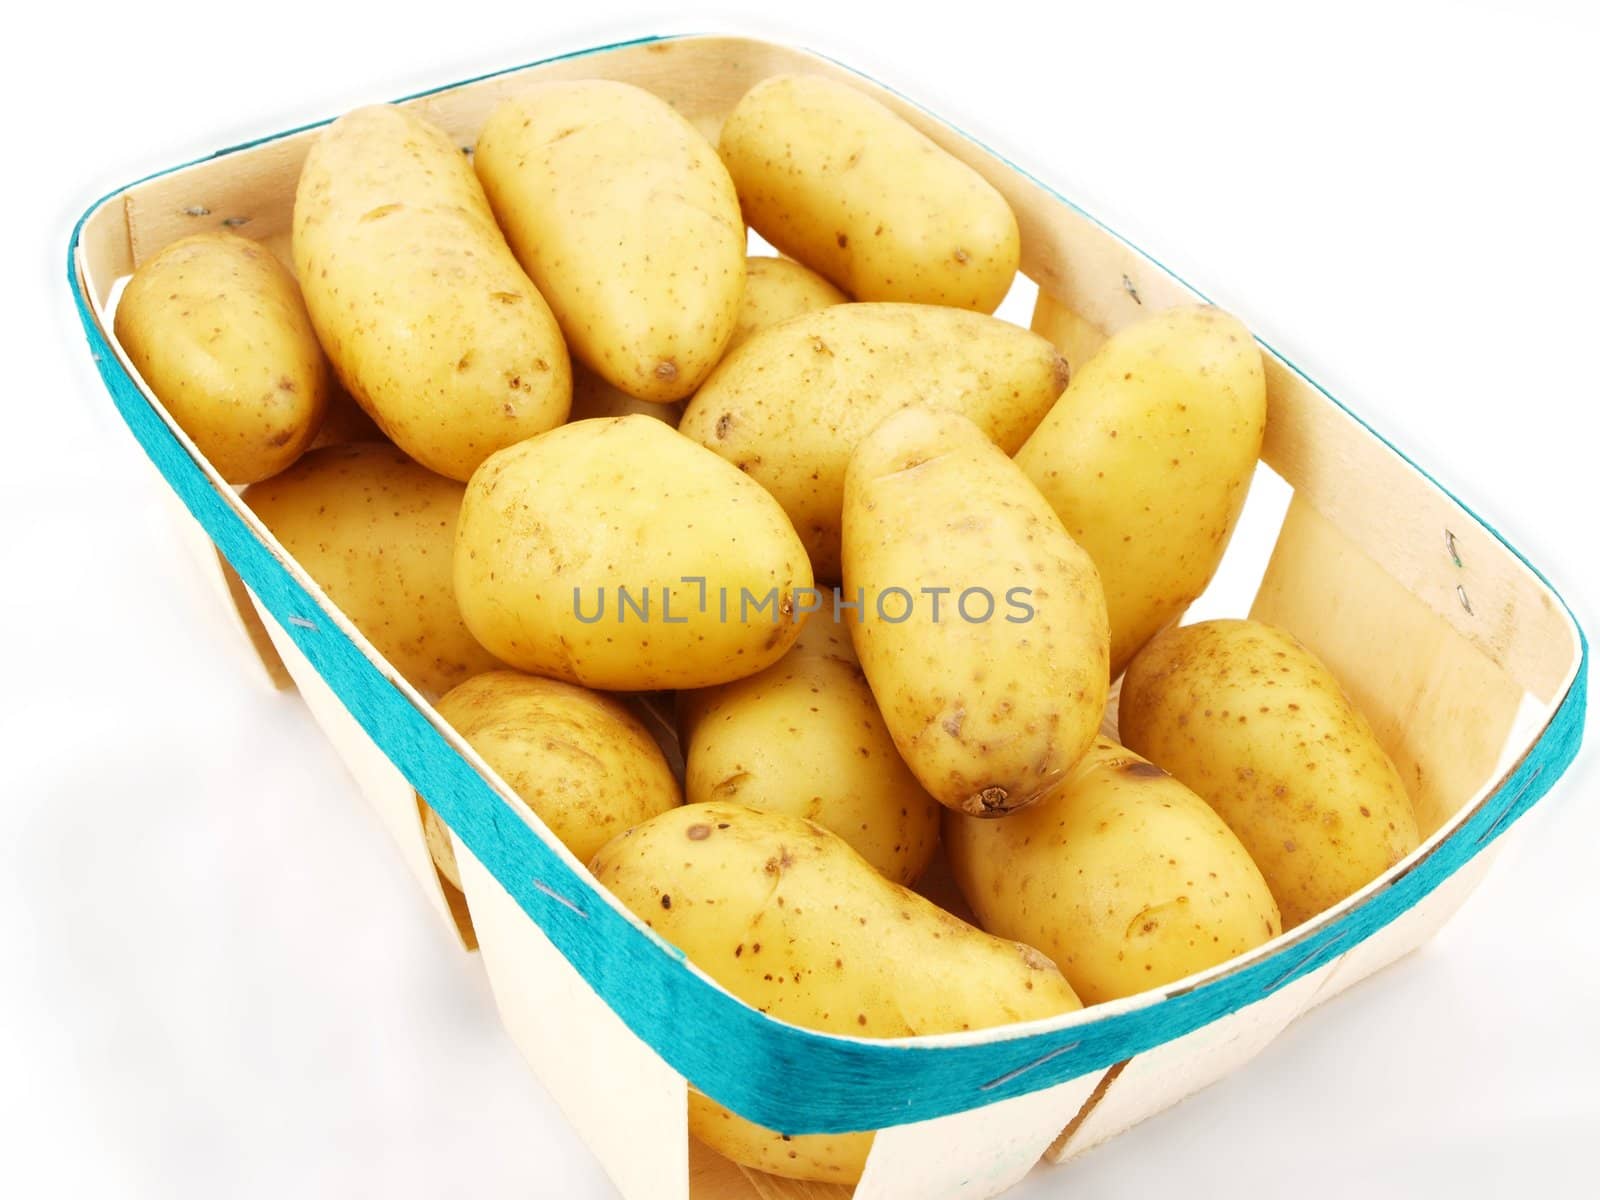 Fresh potatos with shell, in a basket towards white background